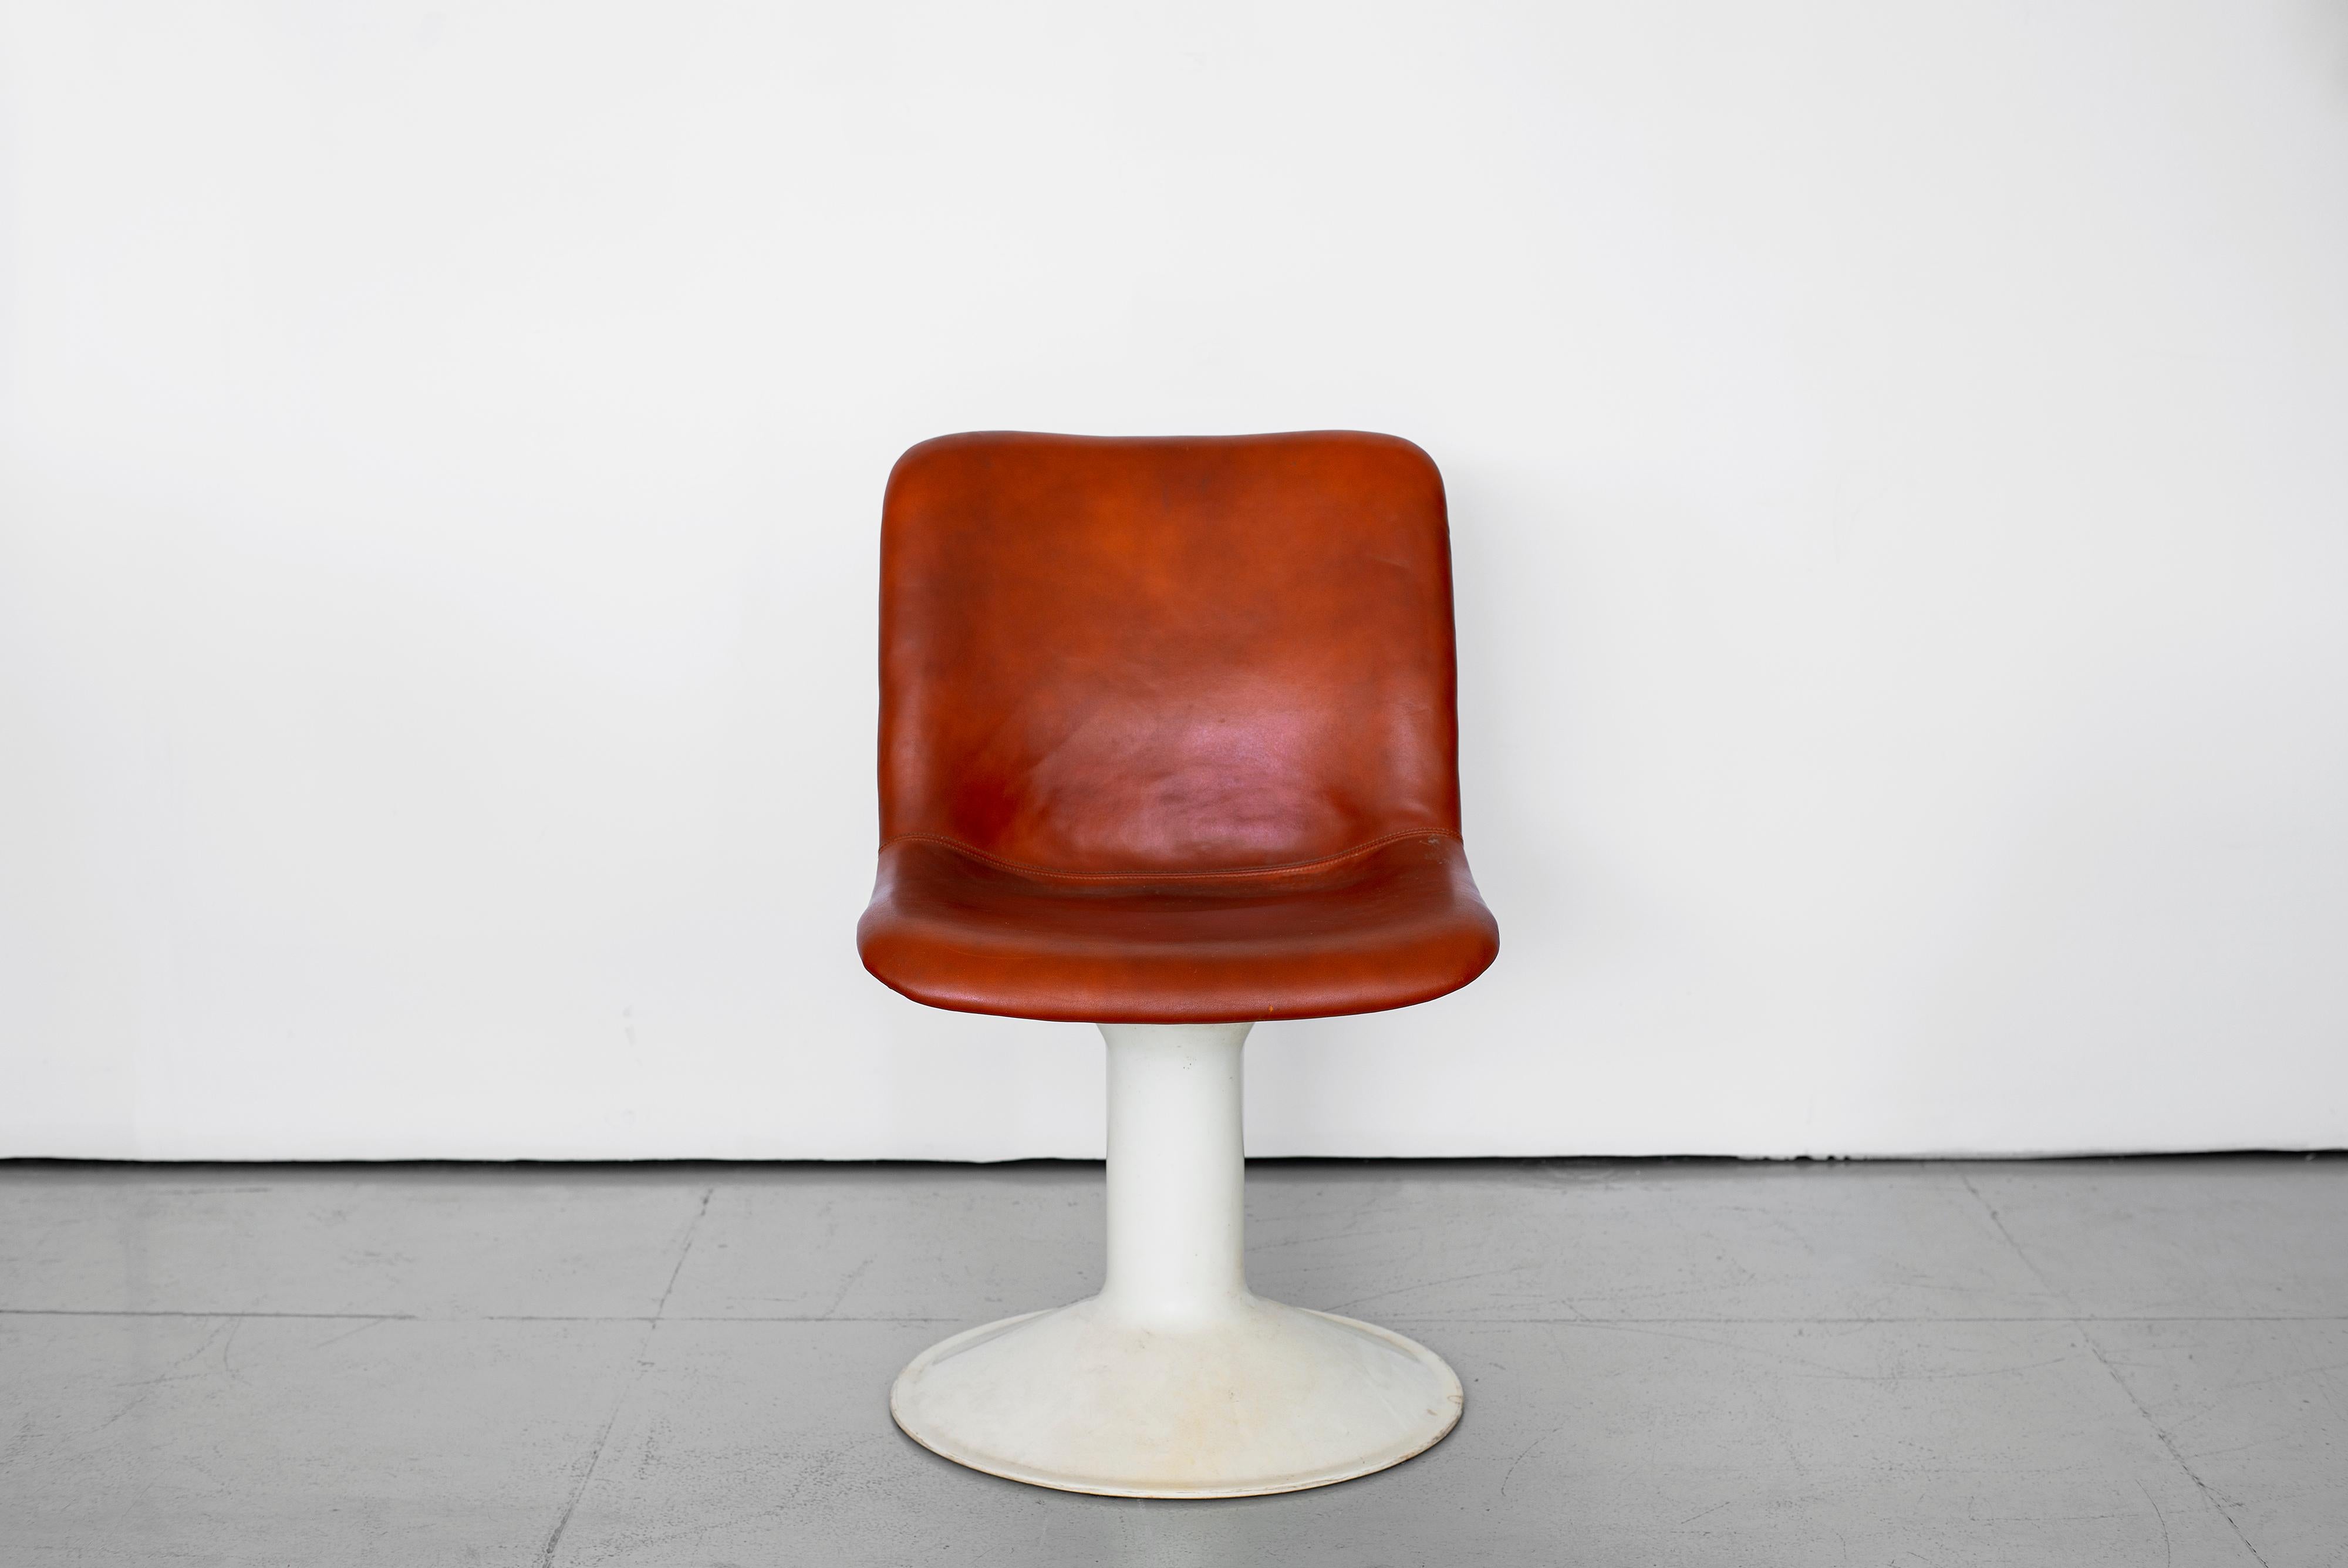 Great brown leather desk chair designed by Yrjö Kukkapuro, made in Finland. Leather seat, white plastic fiberglass back and white metal stationary base. Wonderful patina to leather.